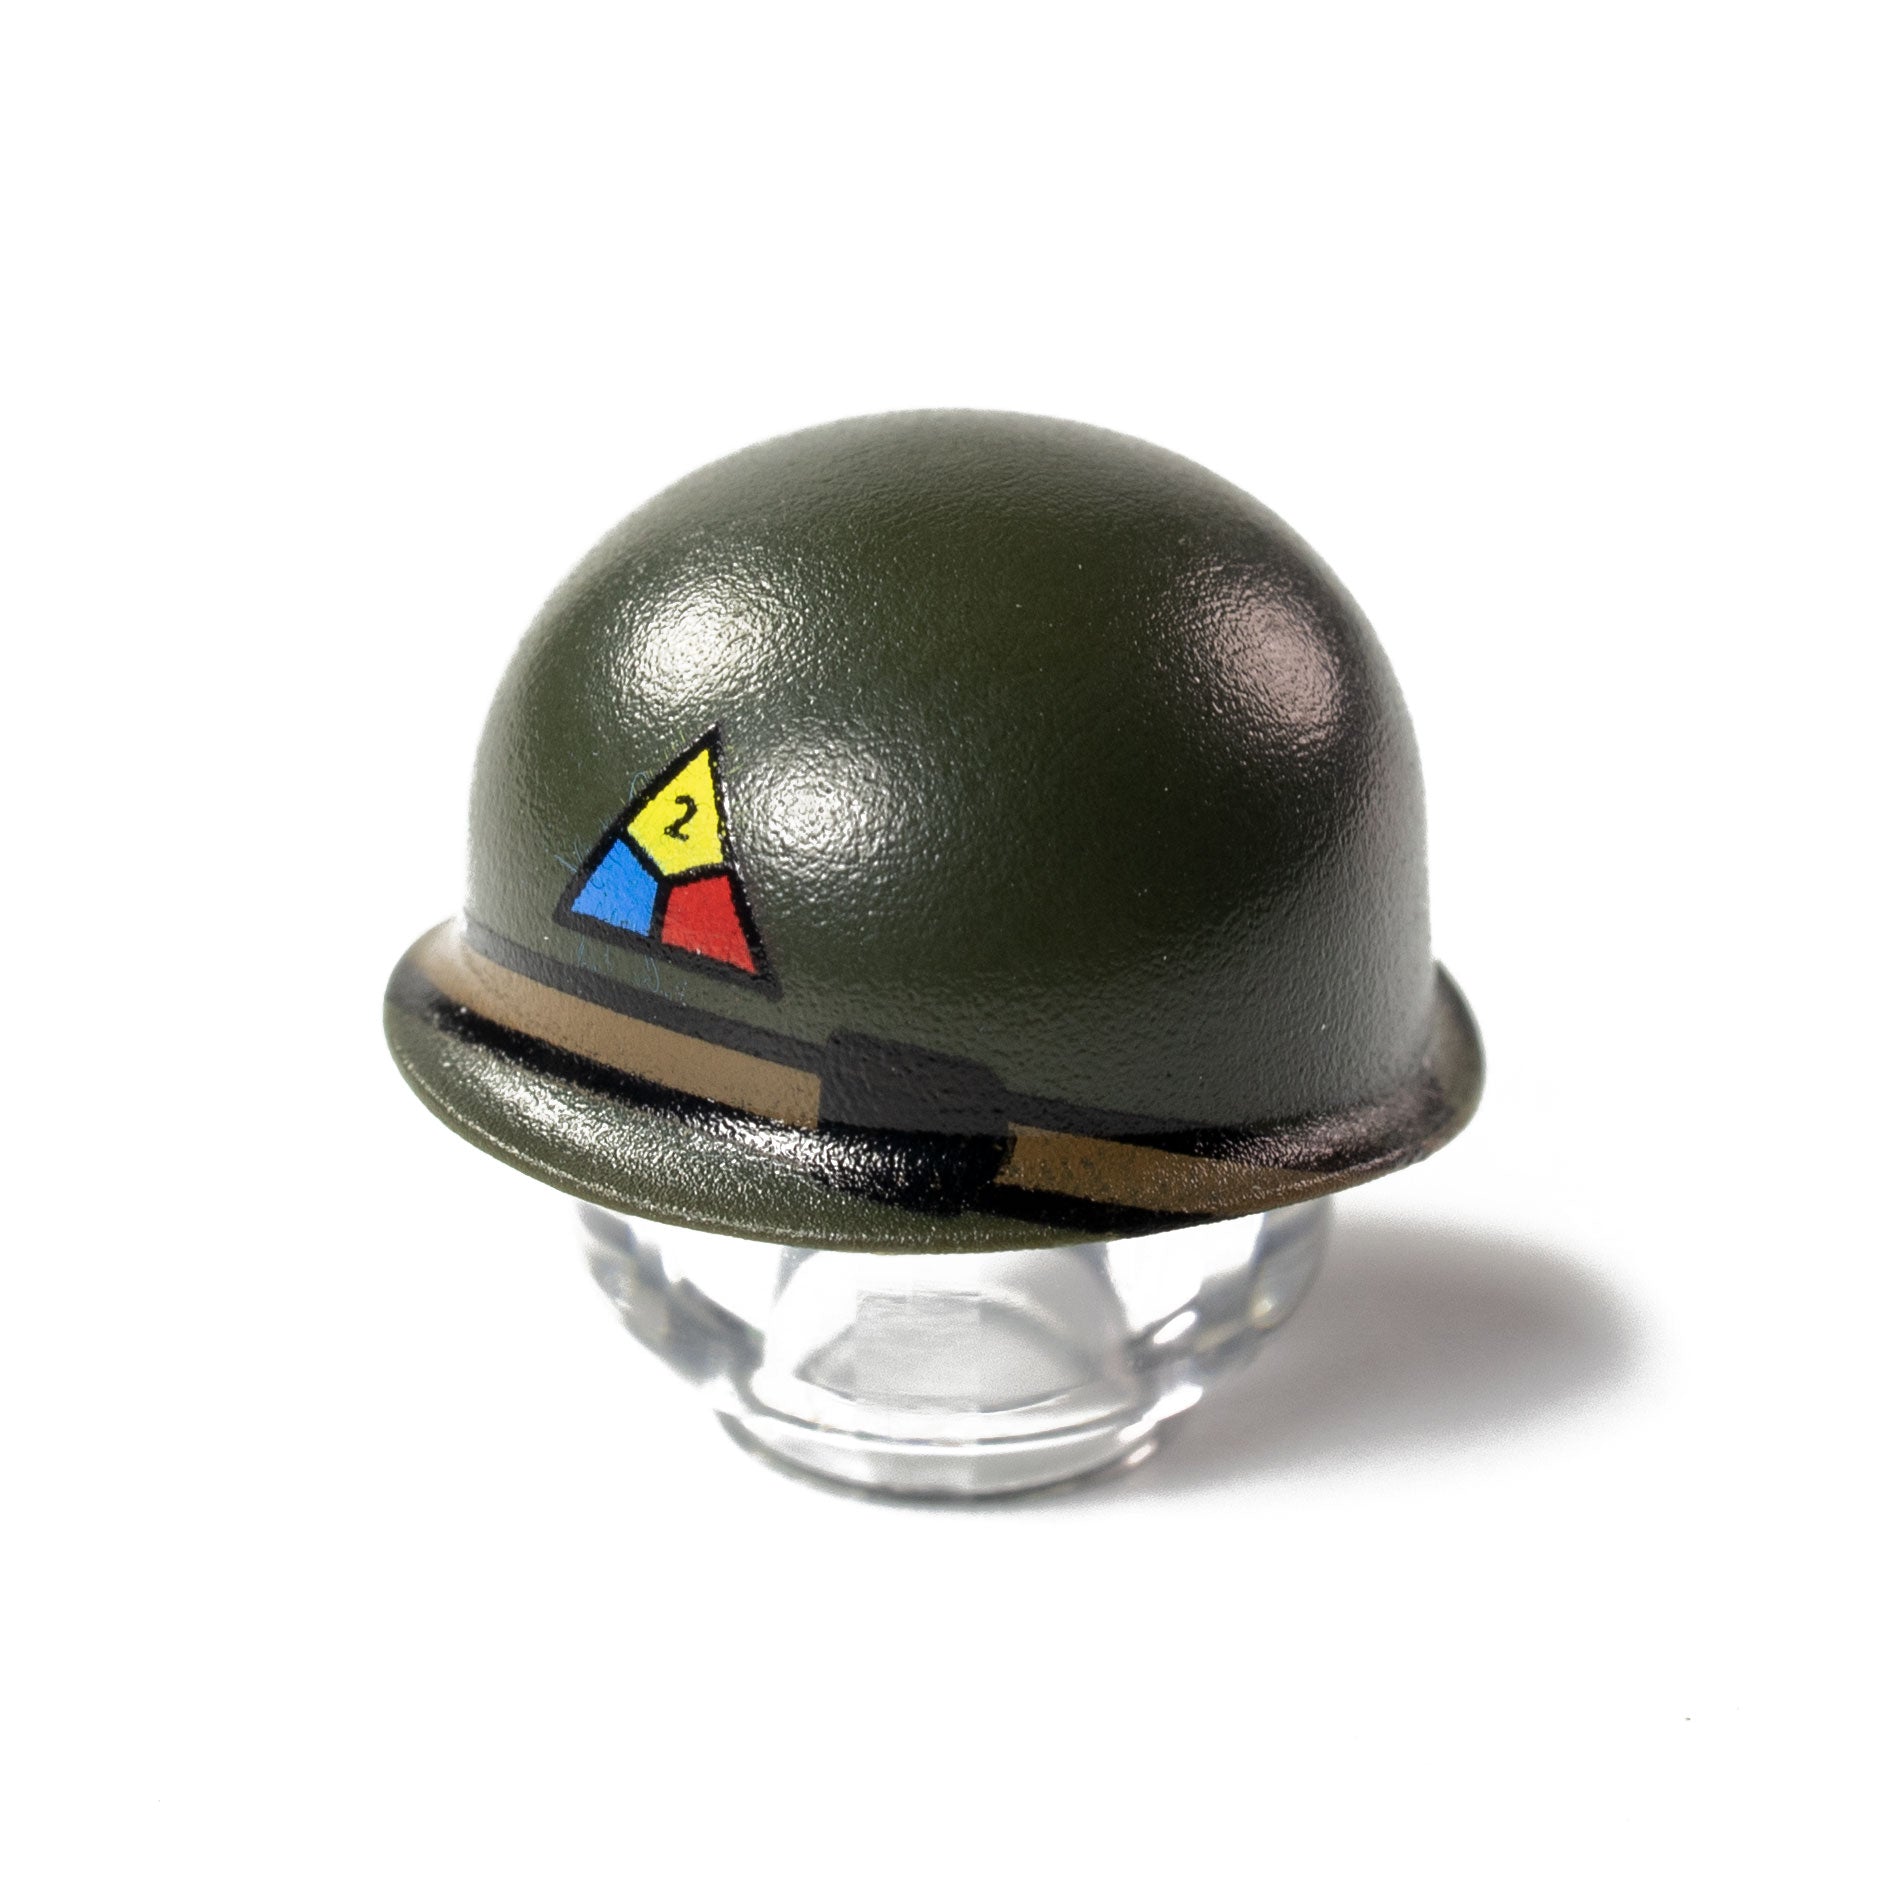 M1 Pot (2nd Armored) - The Minifig Co.